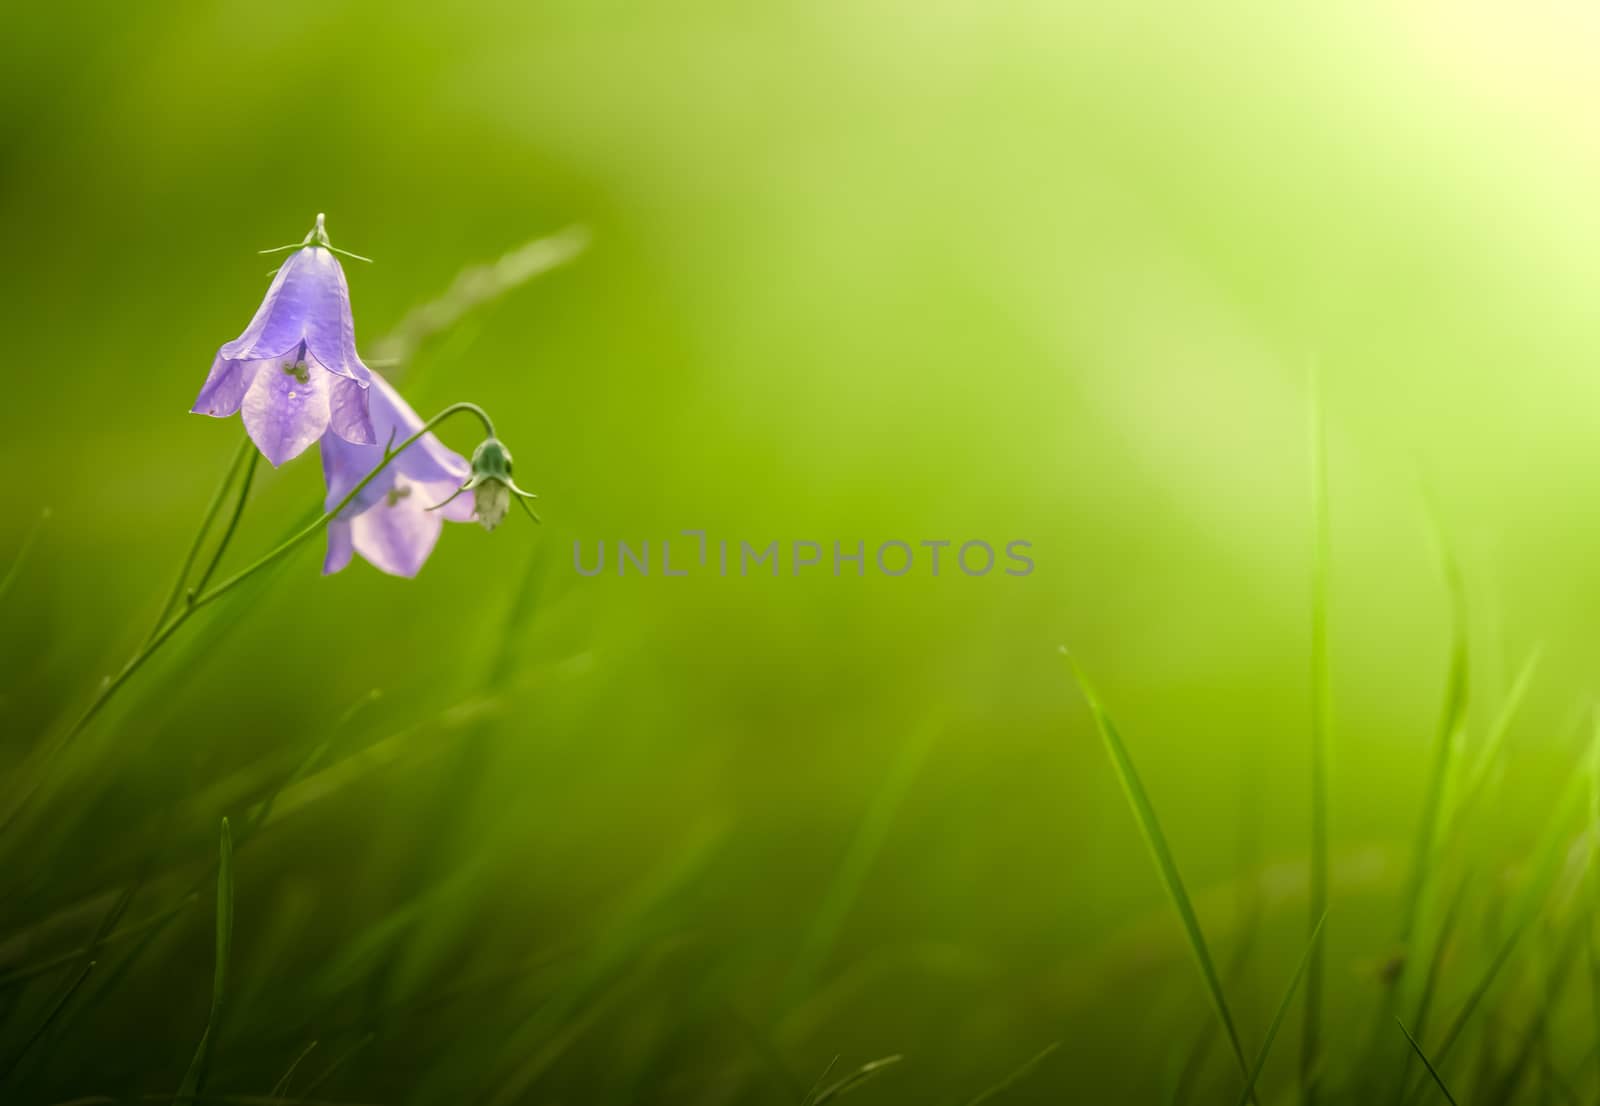 Beautiful Bluebell (Harebell) Flowers With Soft Focus Sunlit Grassy Background With Copyspace